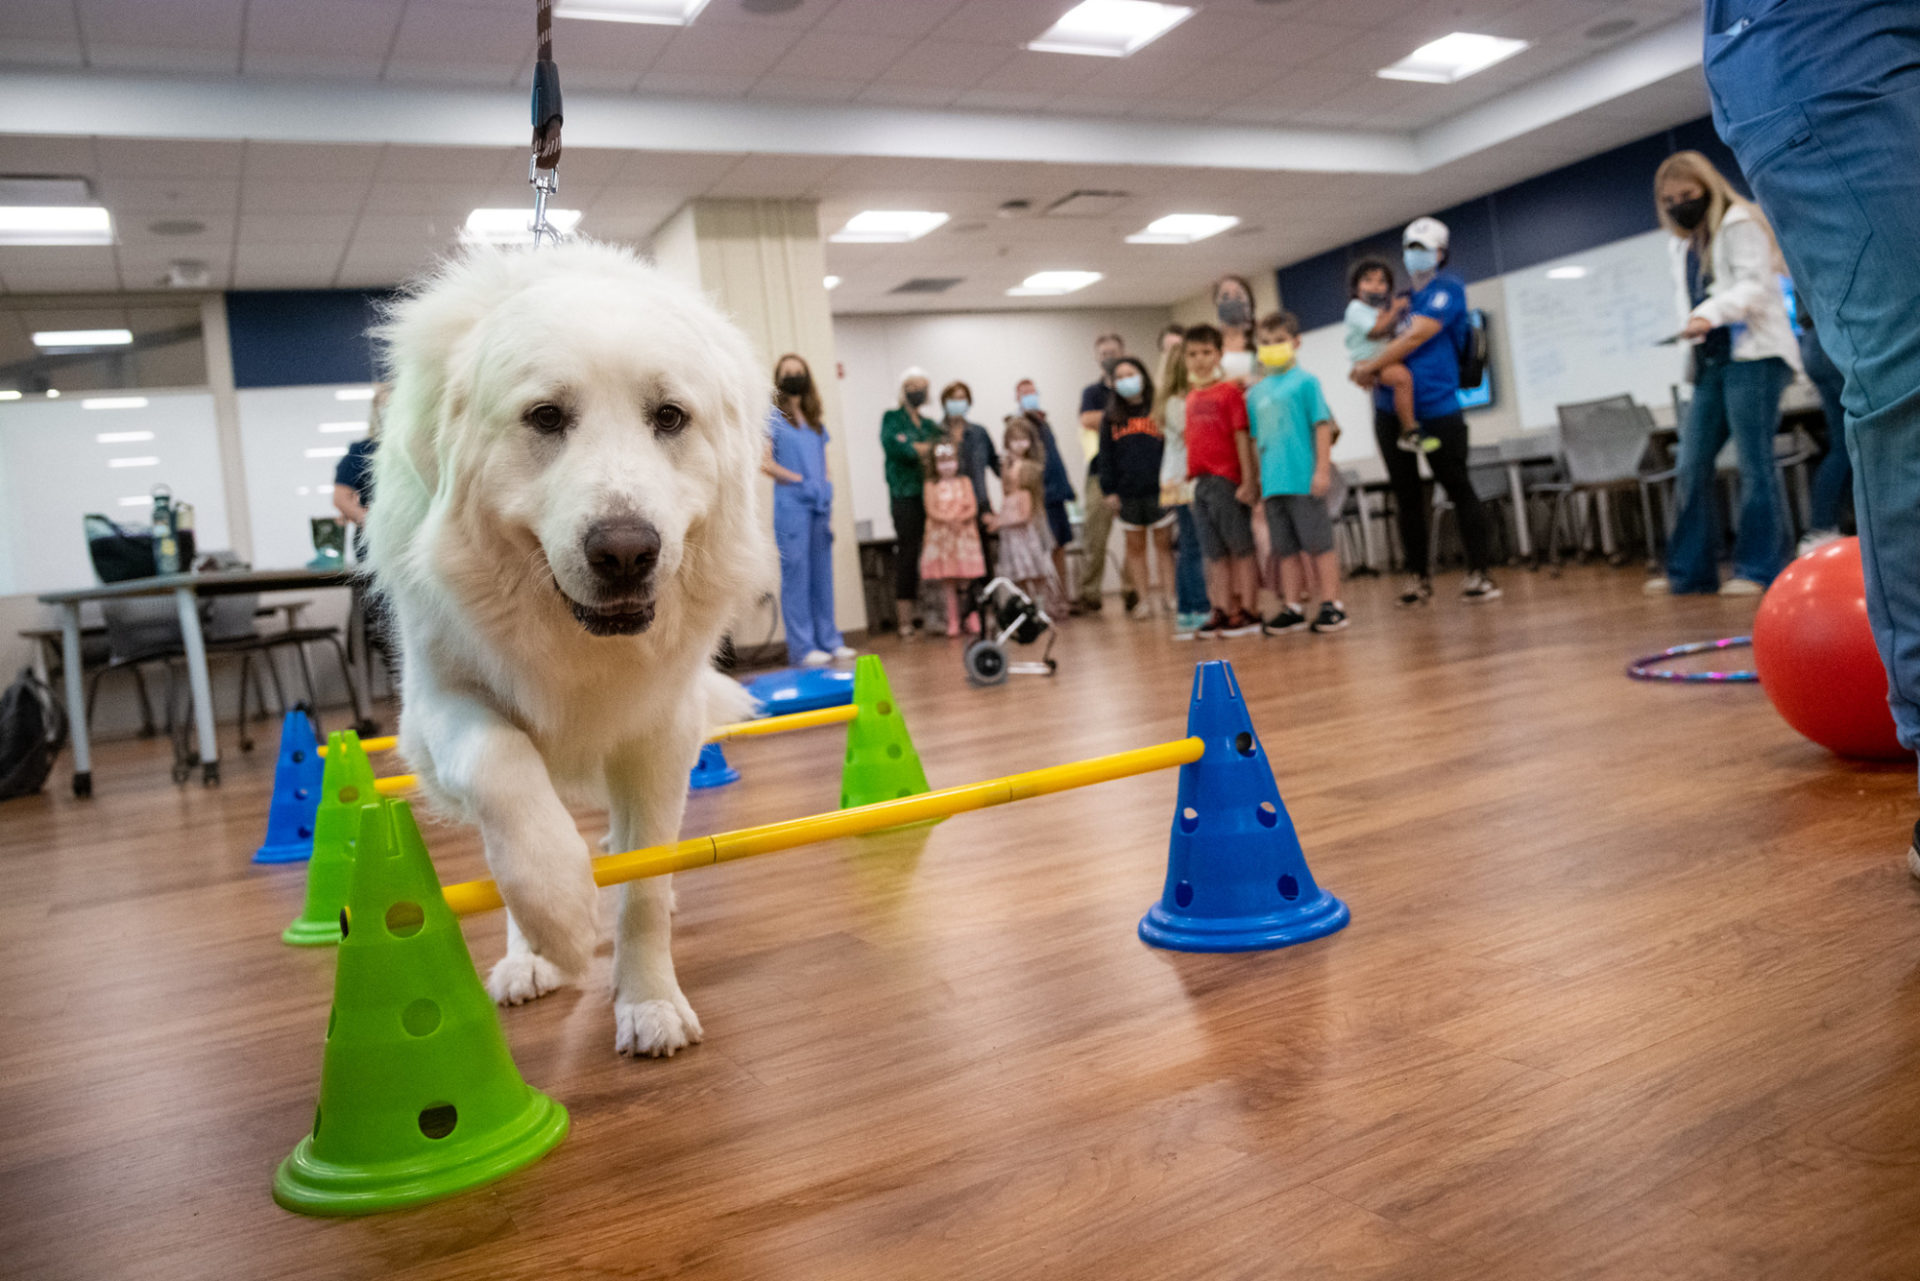 A fluffy white dog goes through an obstacle course at the 2021 University of Illinois Vet Med Open House. The dog is about to step over a yellow bar between a green and a blue cone.